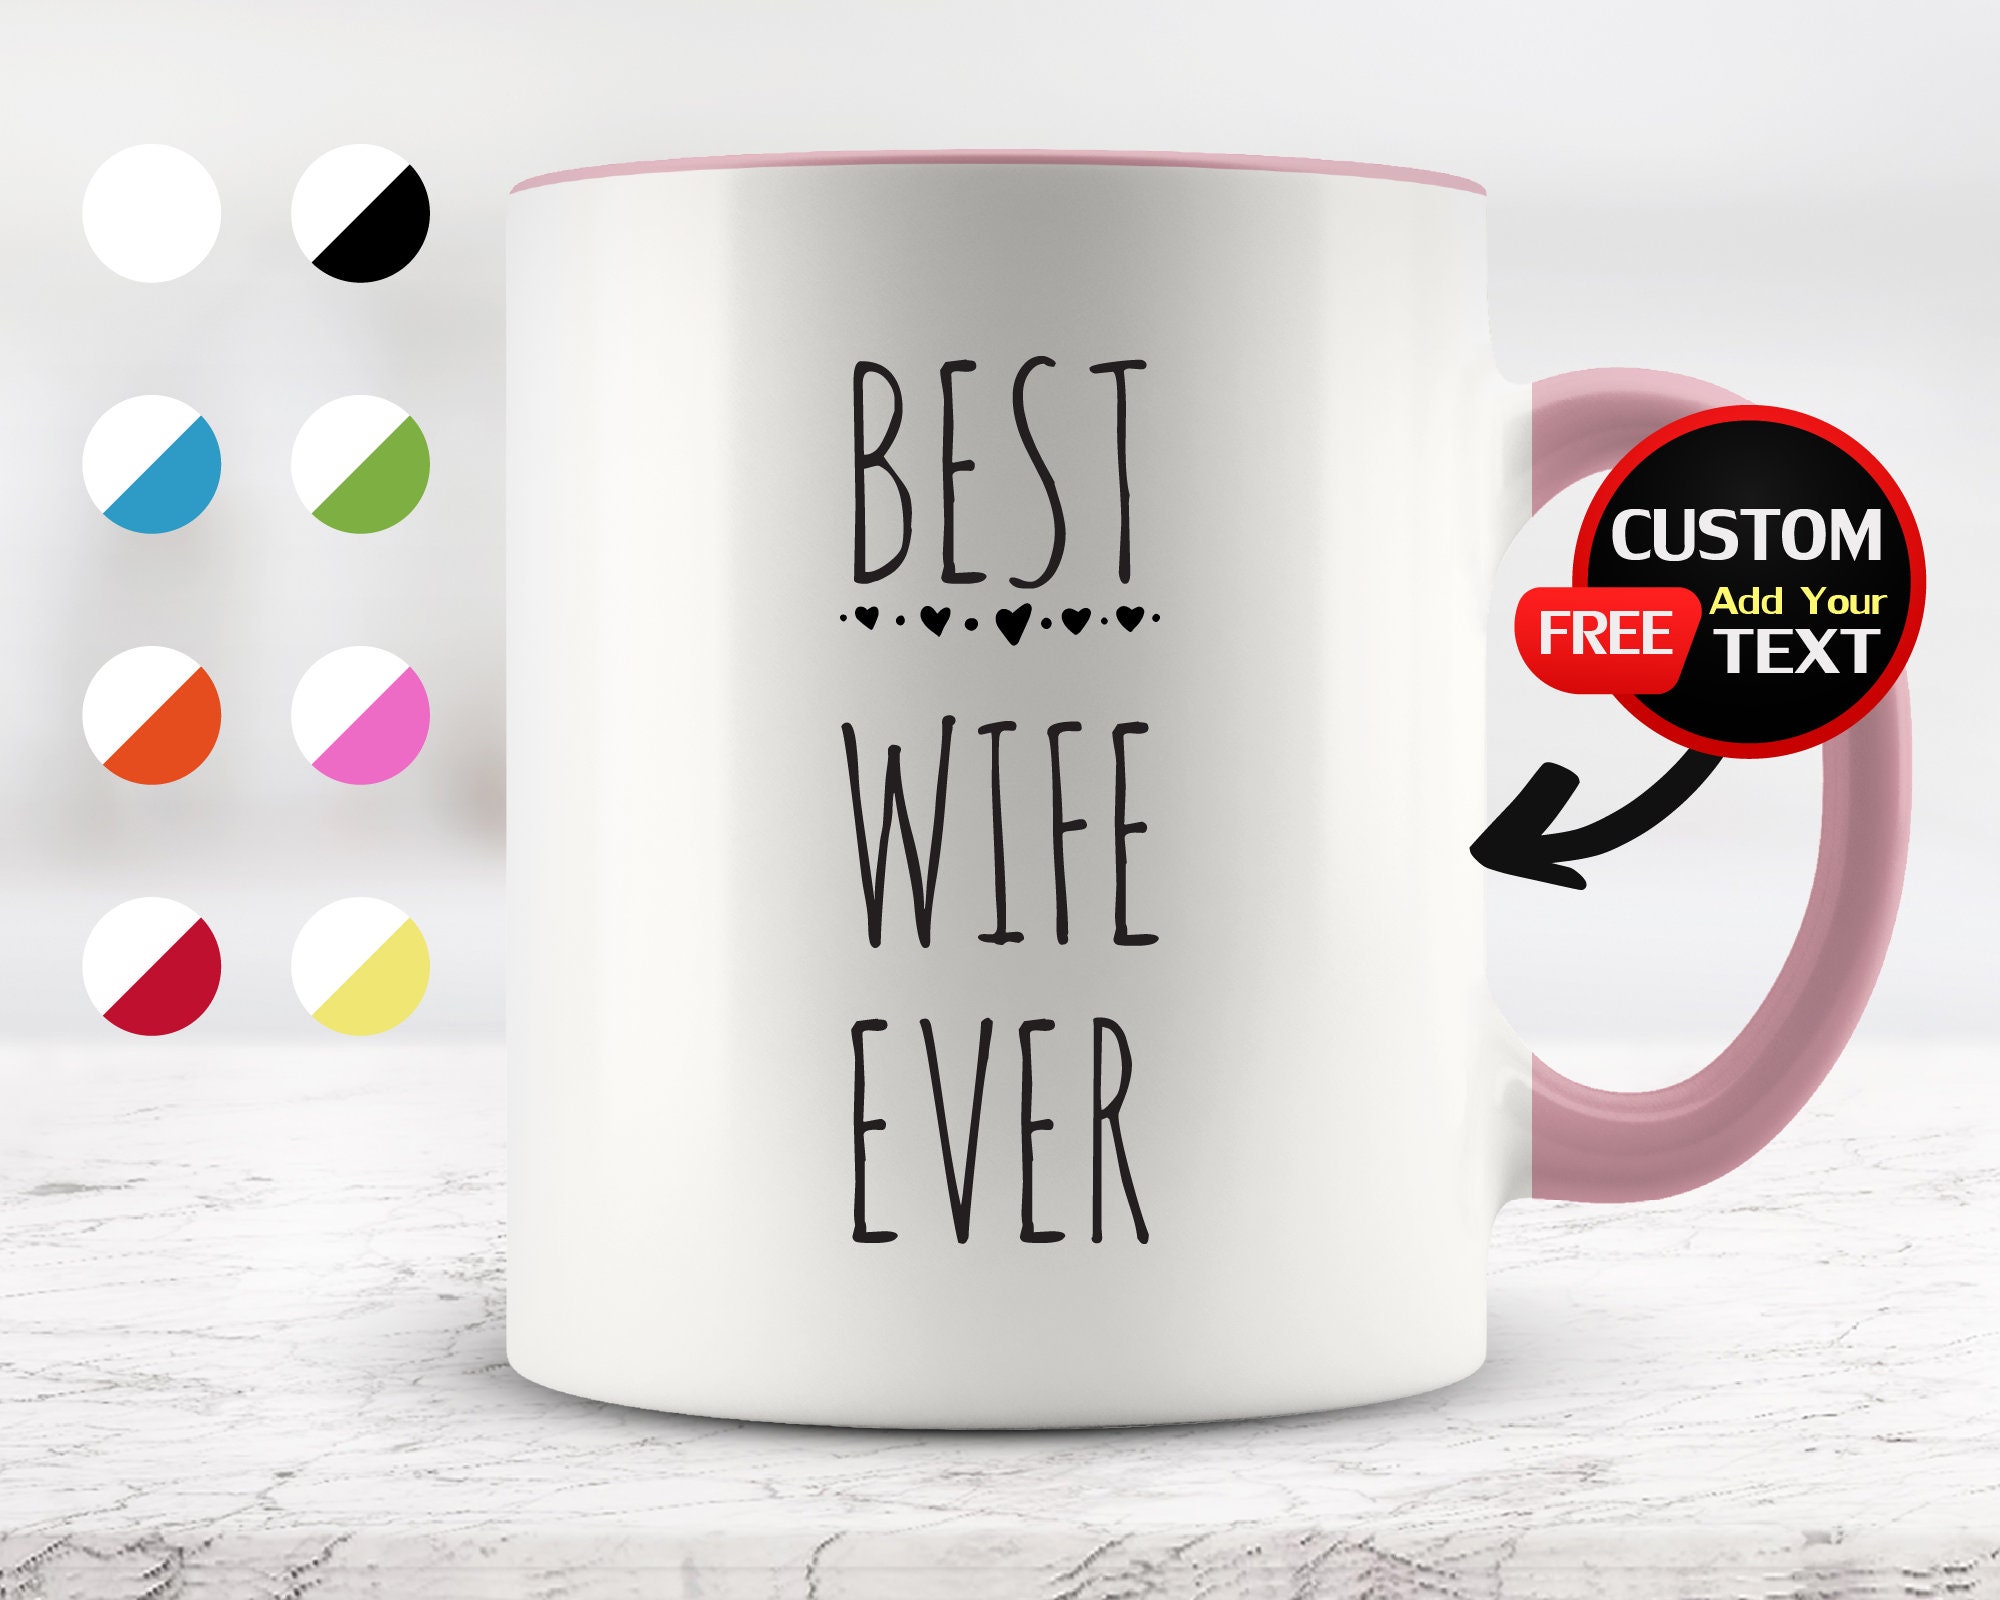 Triple Gifffted Worlds Best Wife Ever Mug For Greatest Women, Appreciation  Gift, Romantic Birthday Gifts Ideas For Her From Husband, Anniversary,  Valentines, Mothers Day Mugs, Christmas, Coffee Cup 